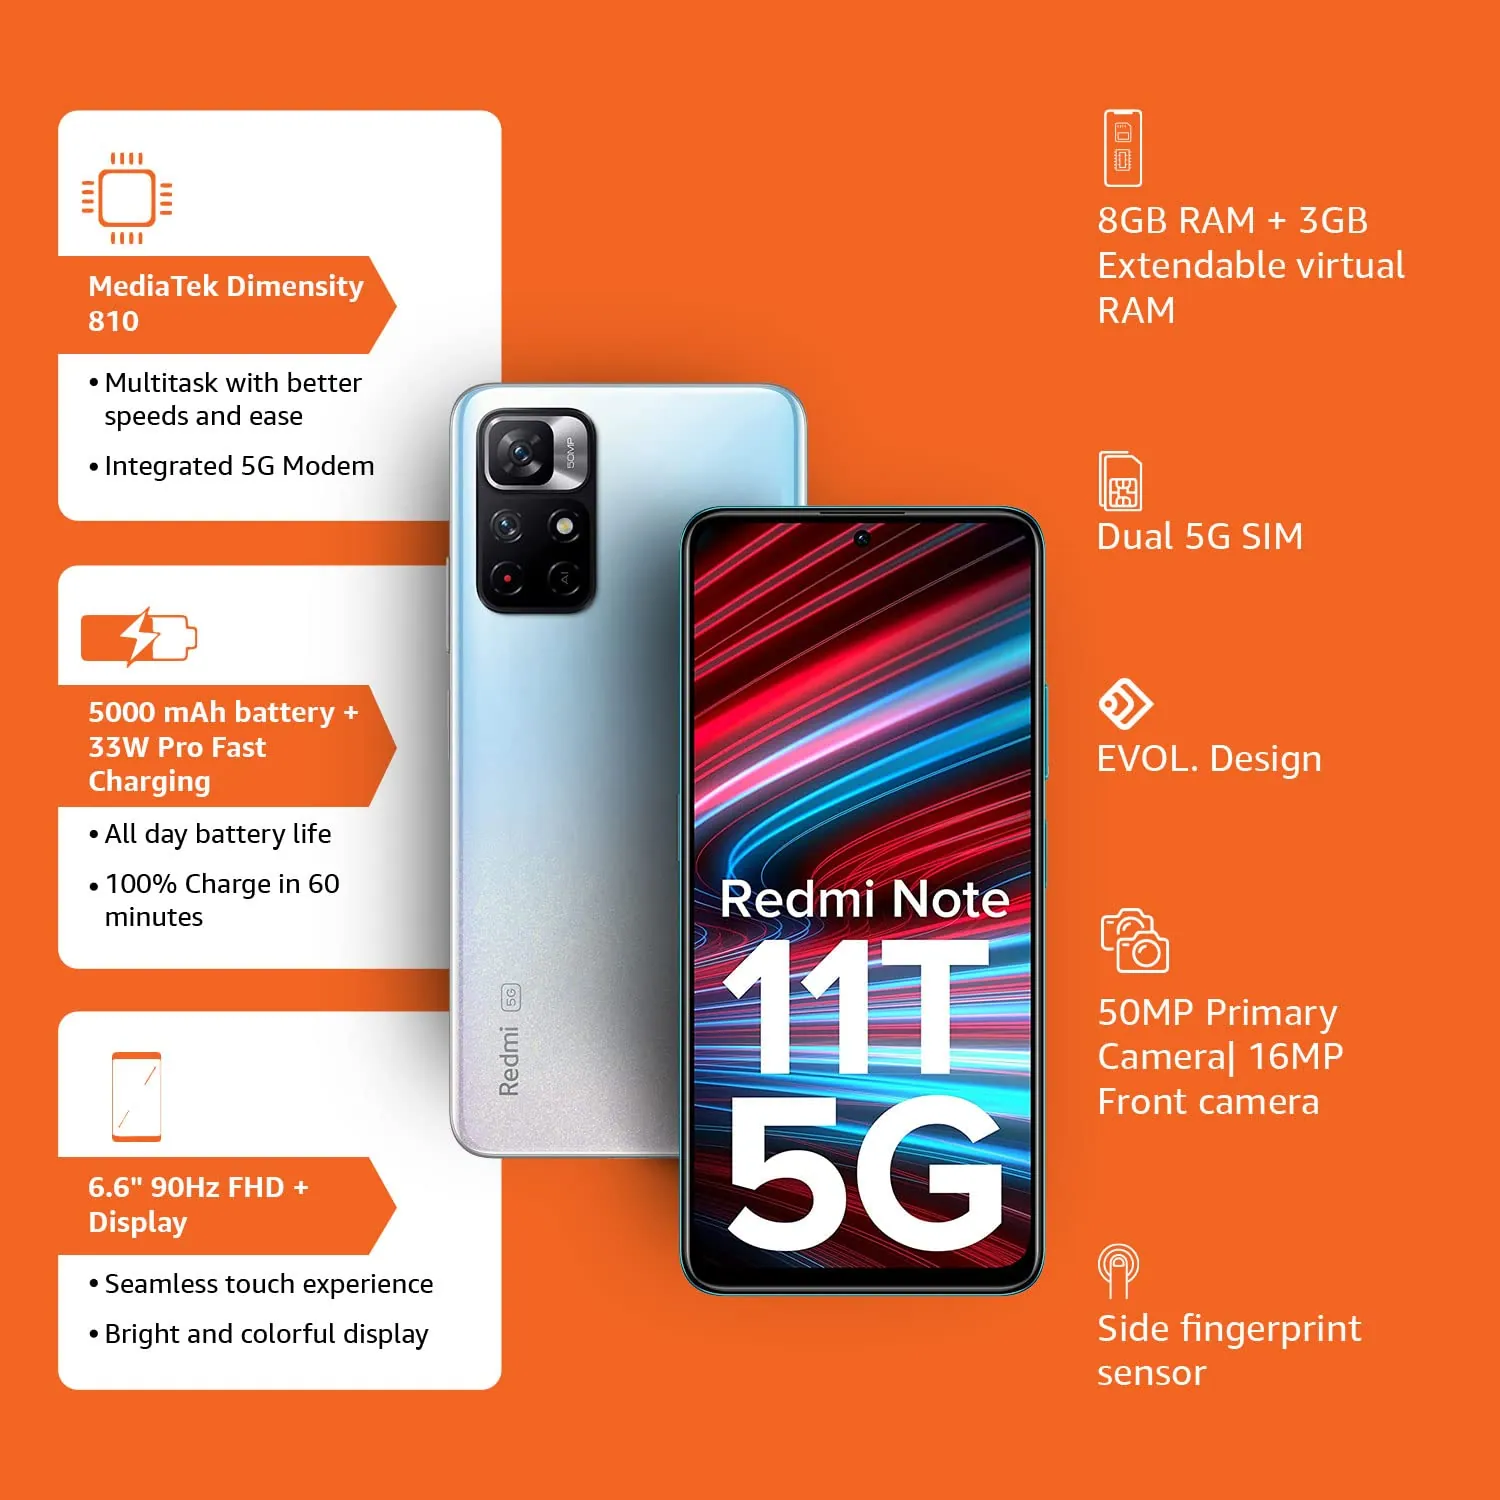 Redmi Note 11T 5G (Matte Black, 6GB RAM, 128GB ROM)| Dimensity 810 5G | 33W Pro Fast Charging | Charger Included